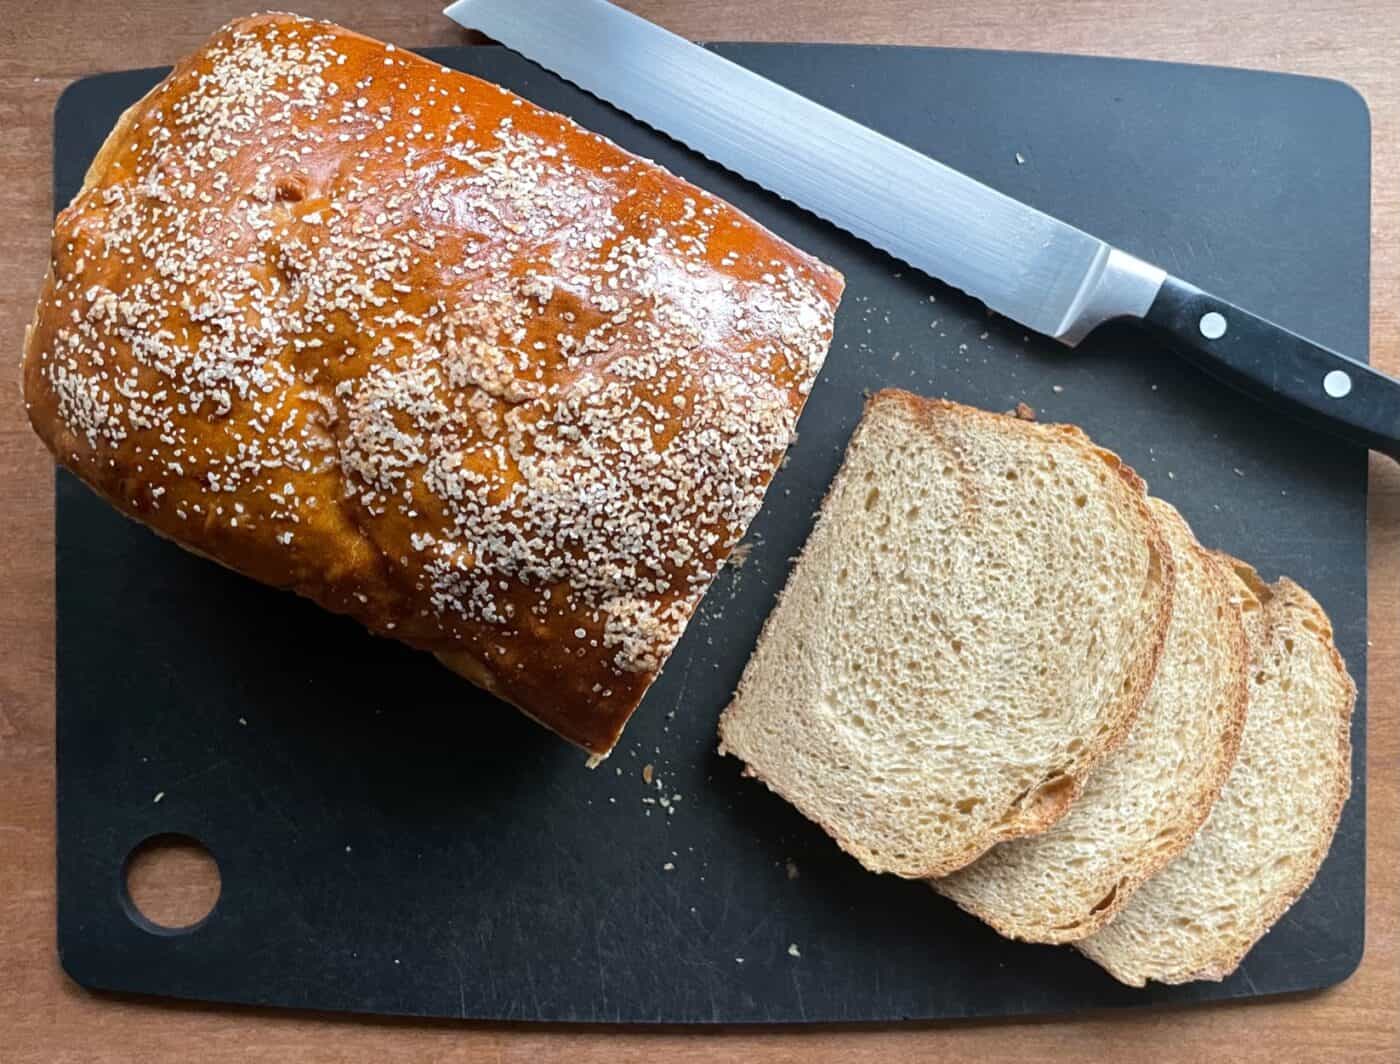 14 Types of Breads for Sandwiches